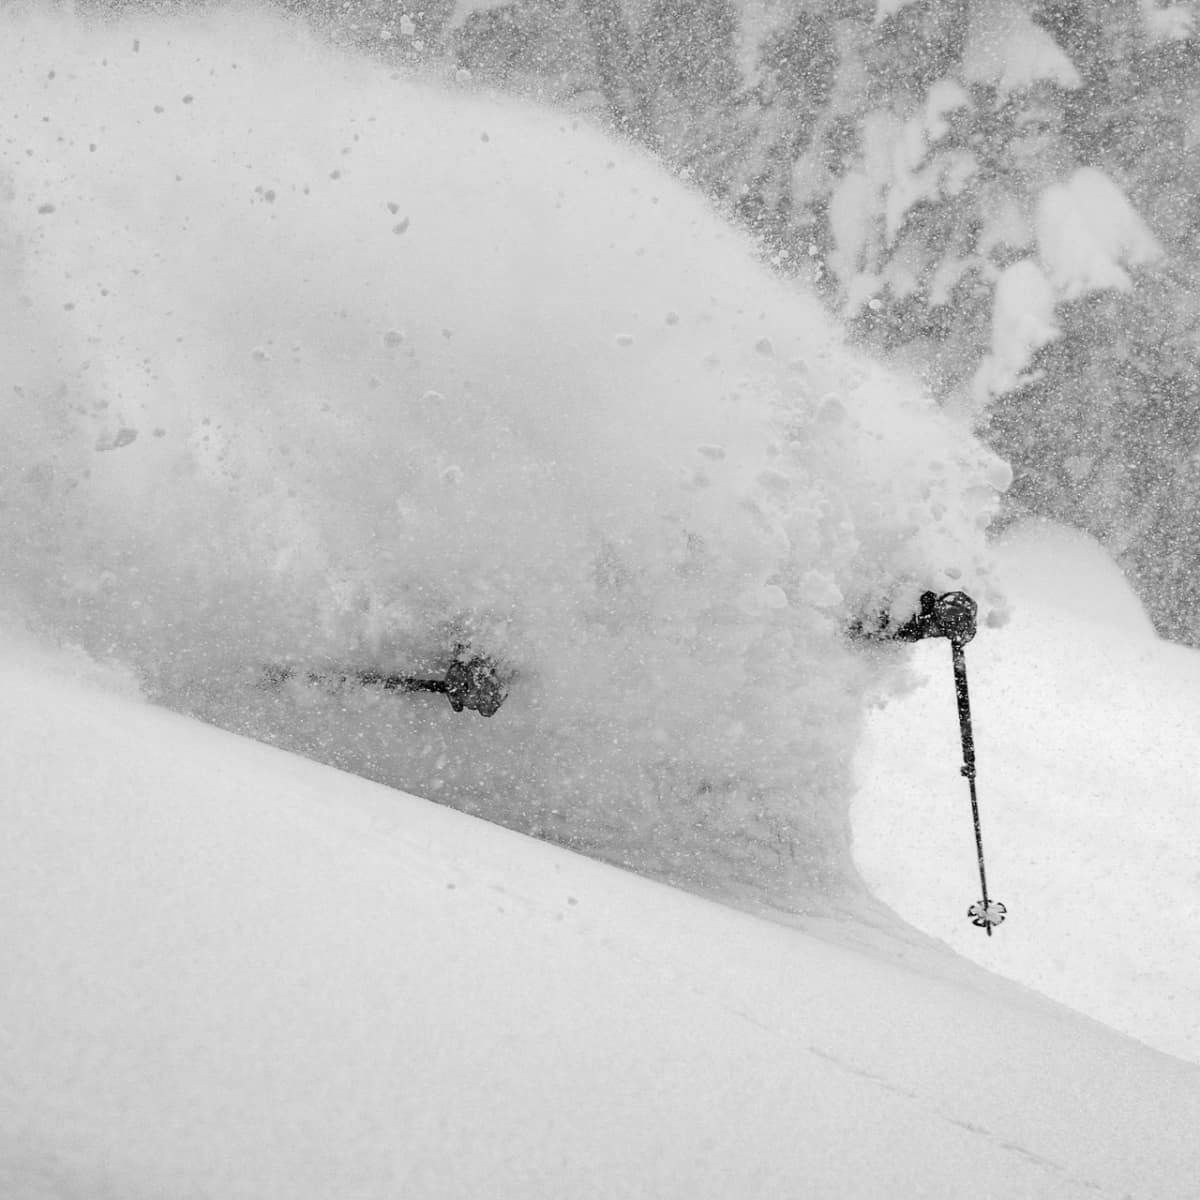 Photos: Skiing Some of the Deepest Snow Ever Recorded - Powder